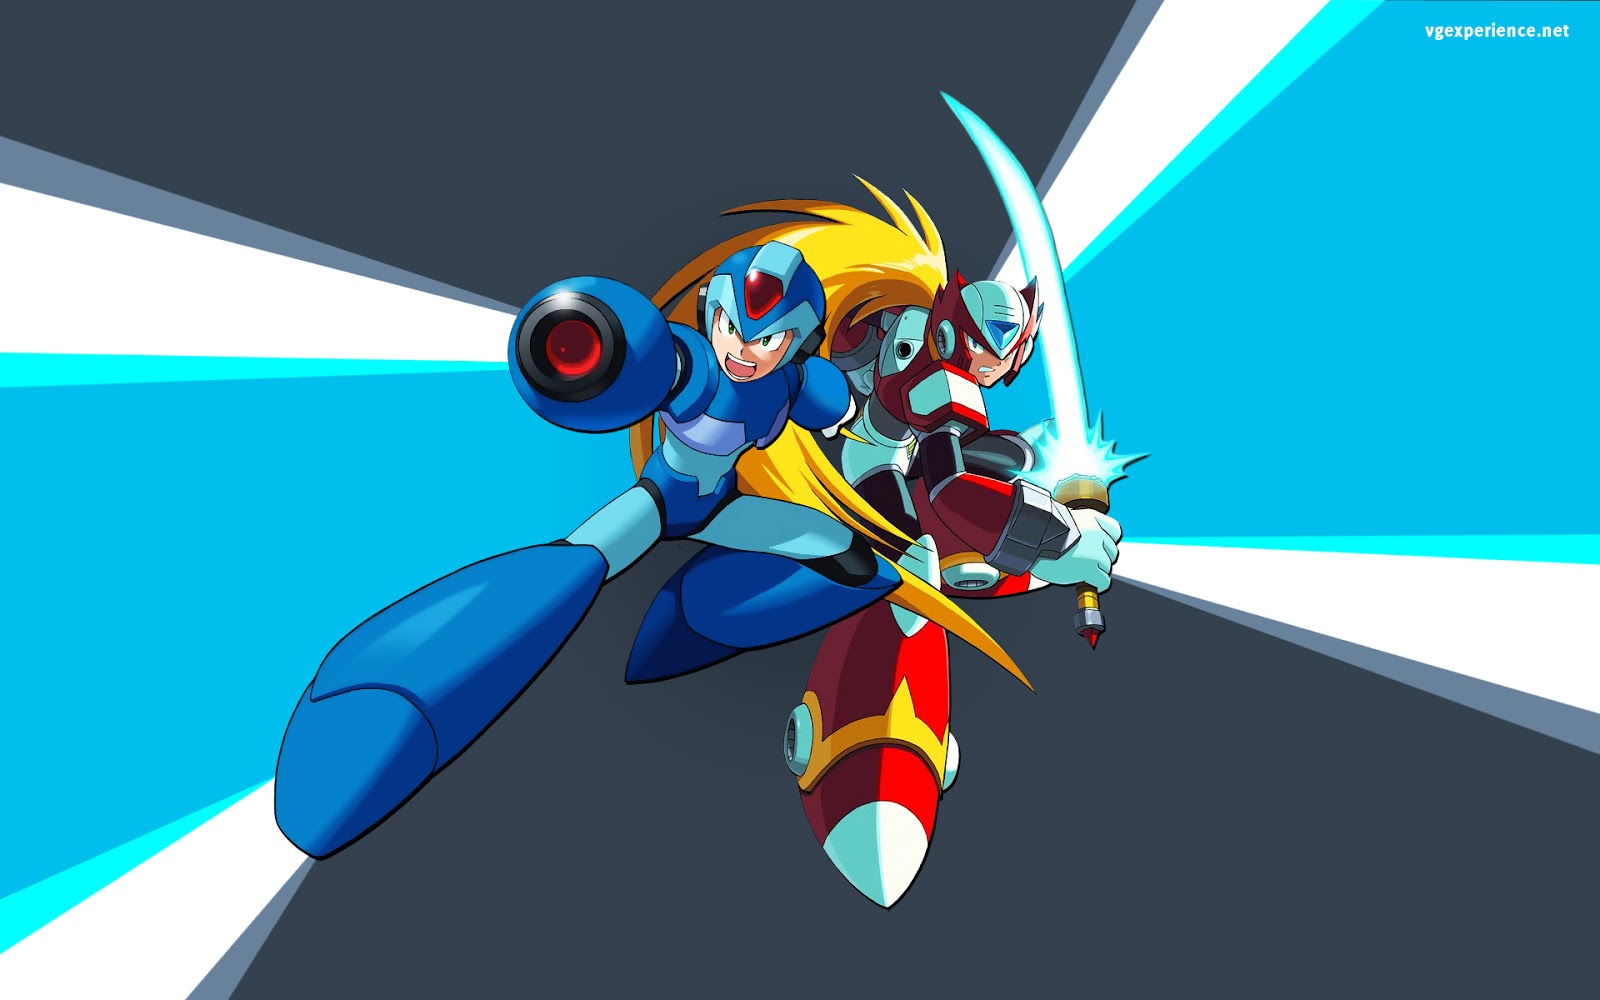 Mega Man X Trailer For The Wii U Virtual Console I Love Game Res